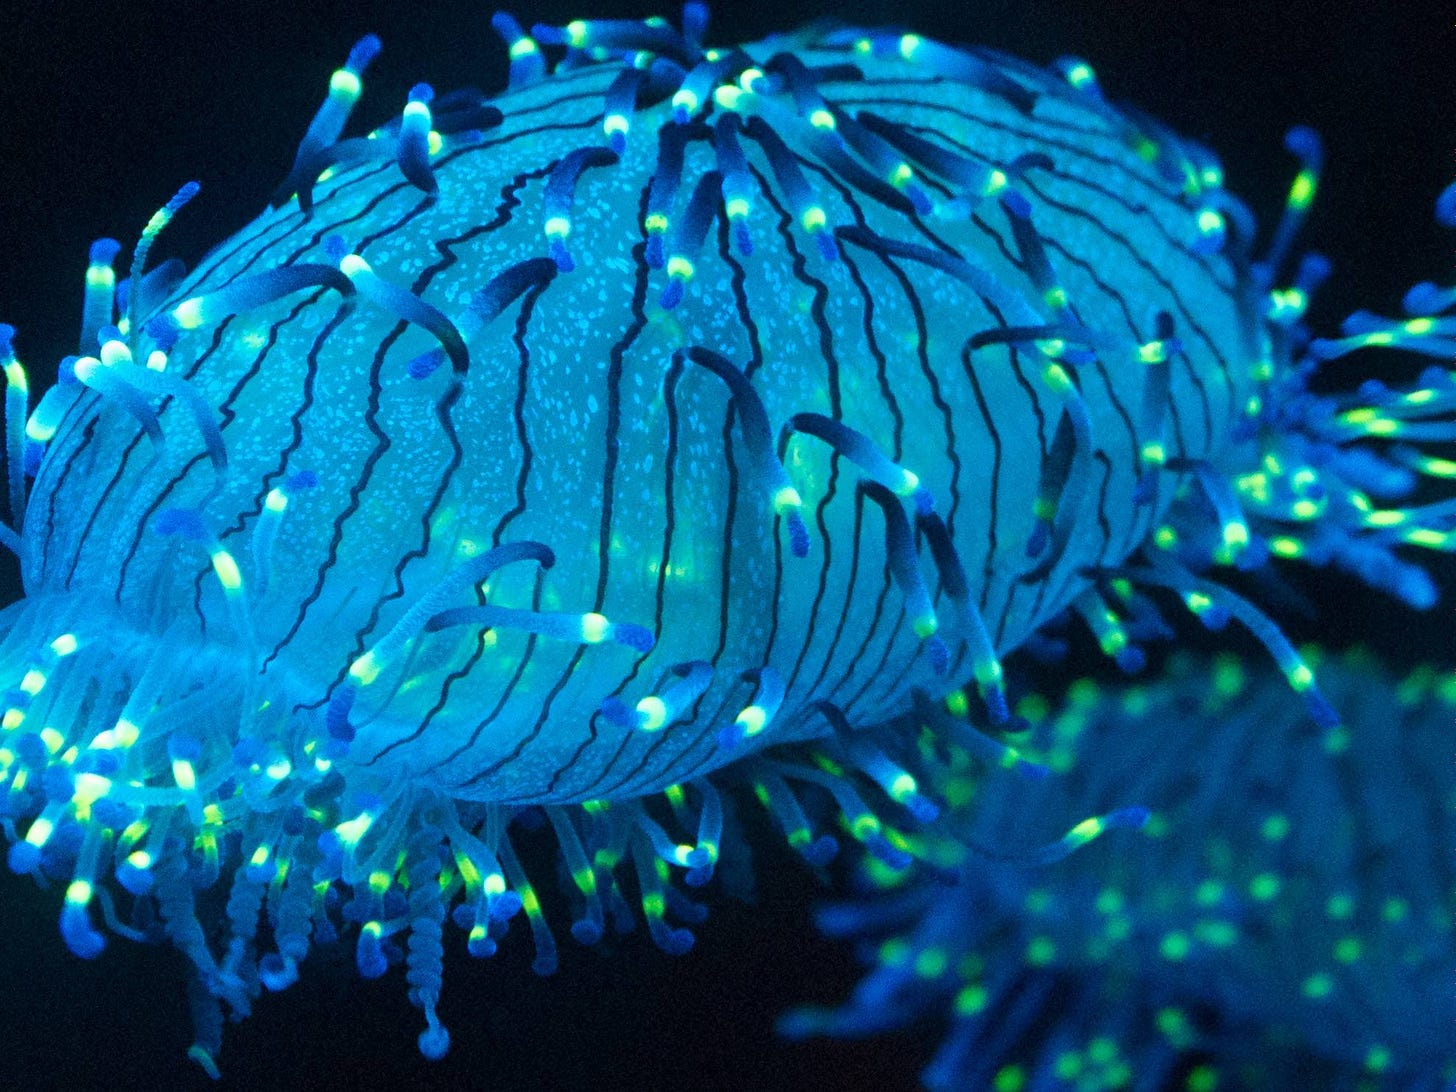 species identification - What is this blue-green bioluminescent jellyfish I  saw at Aquarium of the Pacific? - Biology Stack Exchange